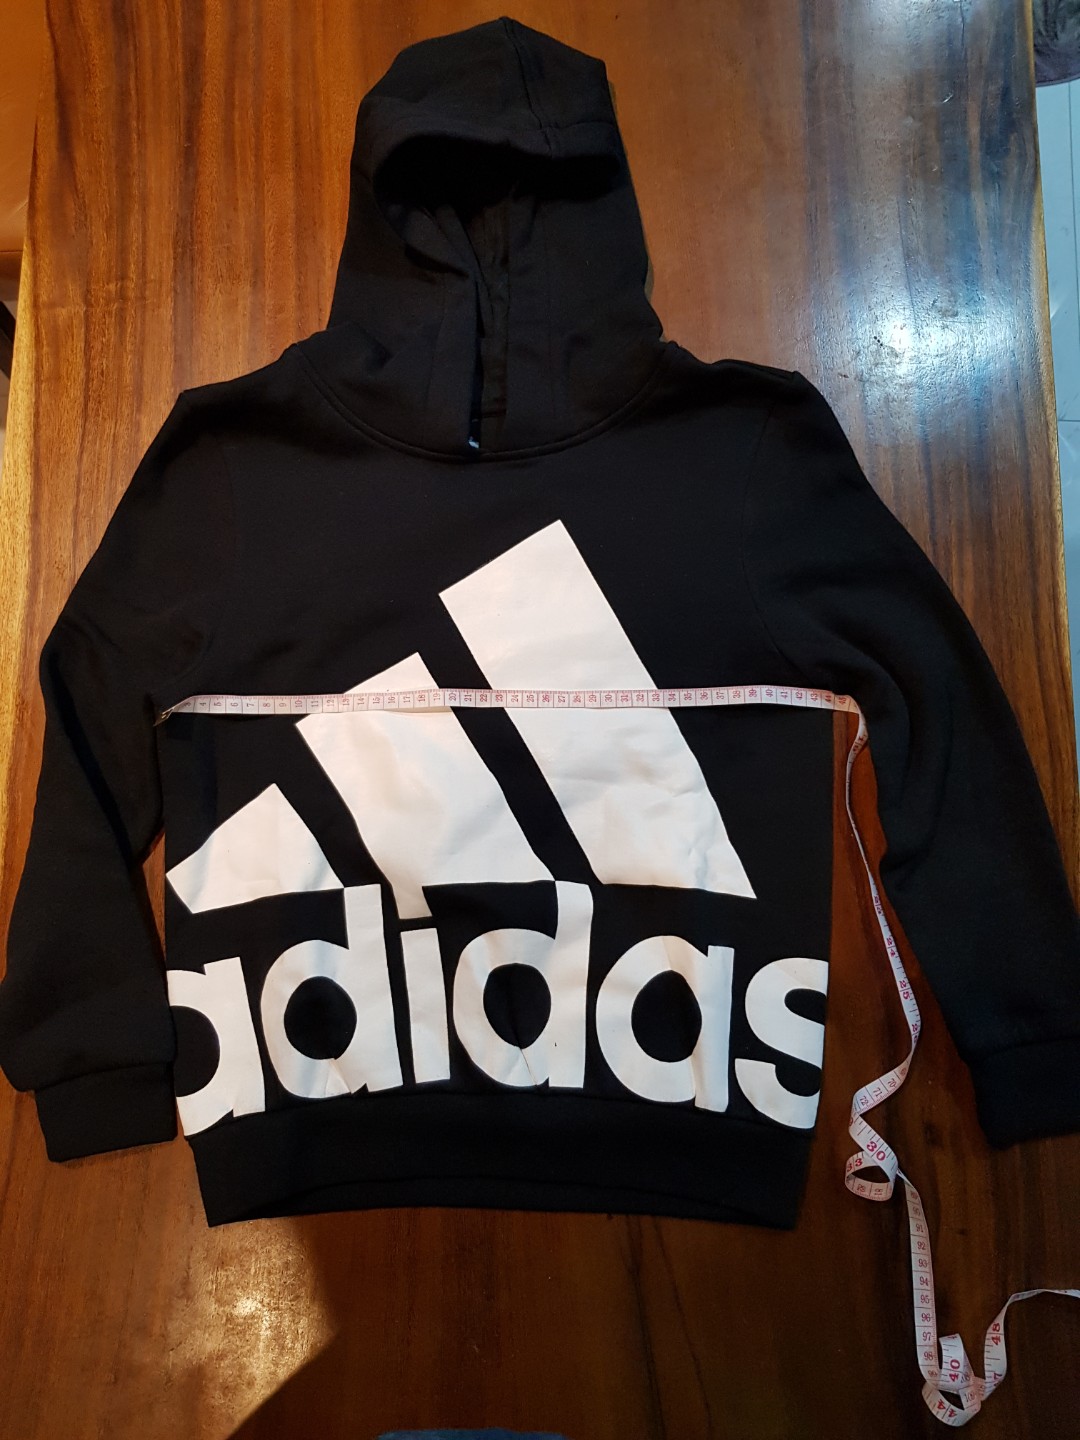 adidas sweater for kids